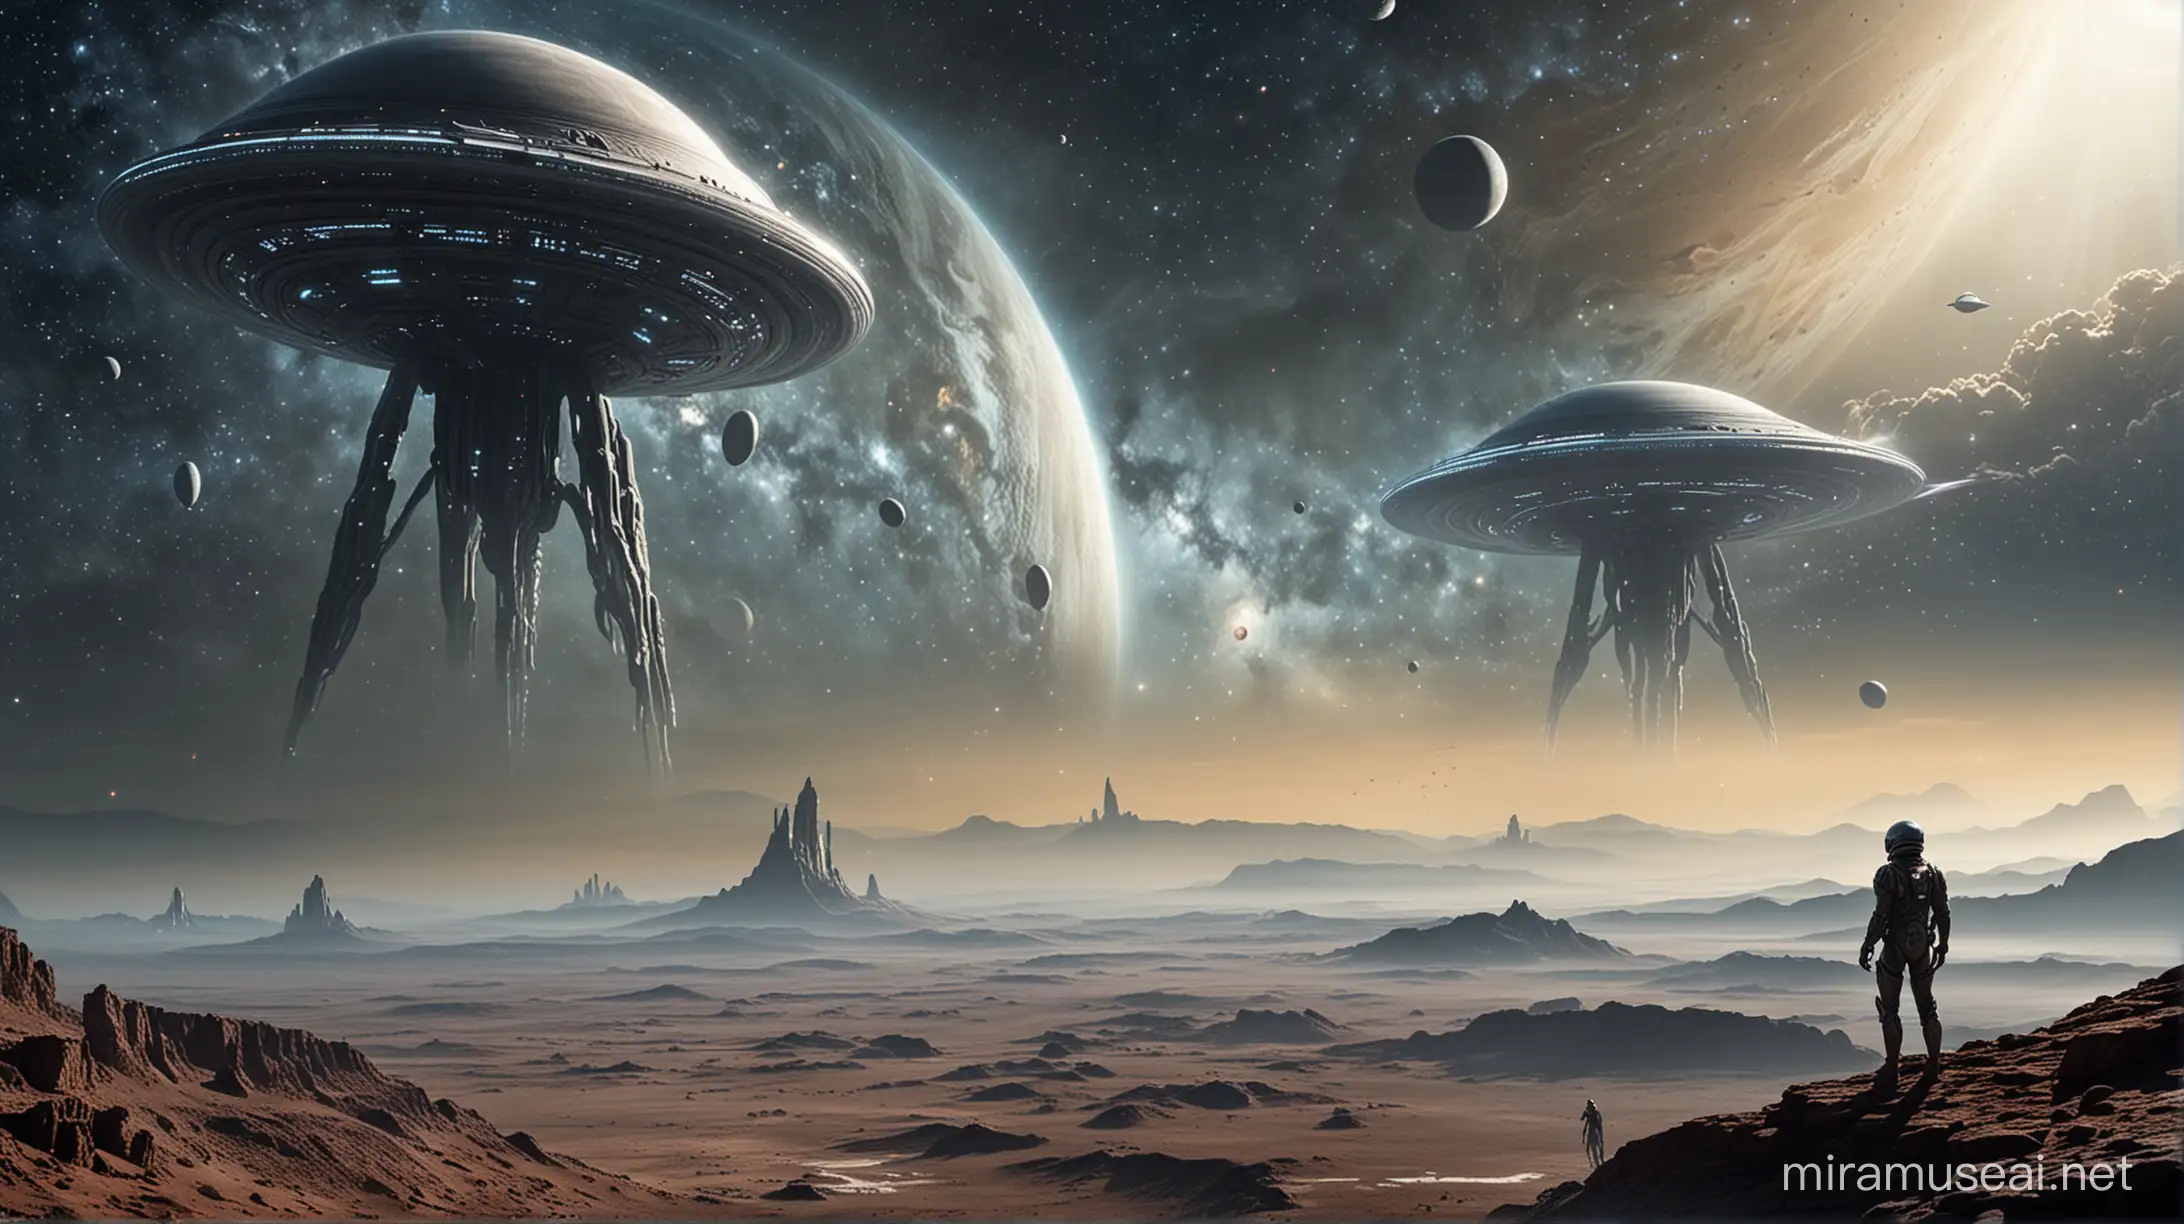 Interstellar Diplomacy Humans and Aliens Share Knowledge